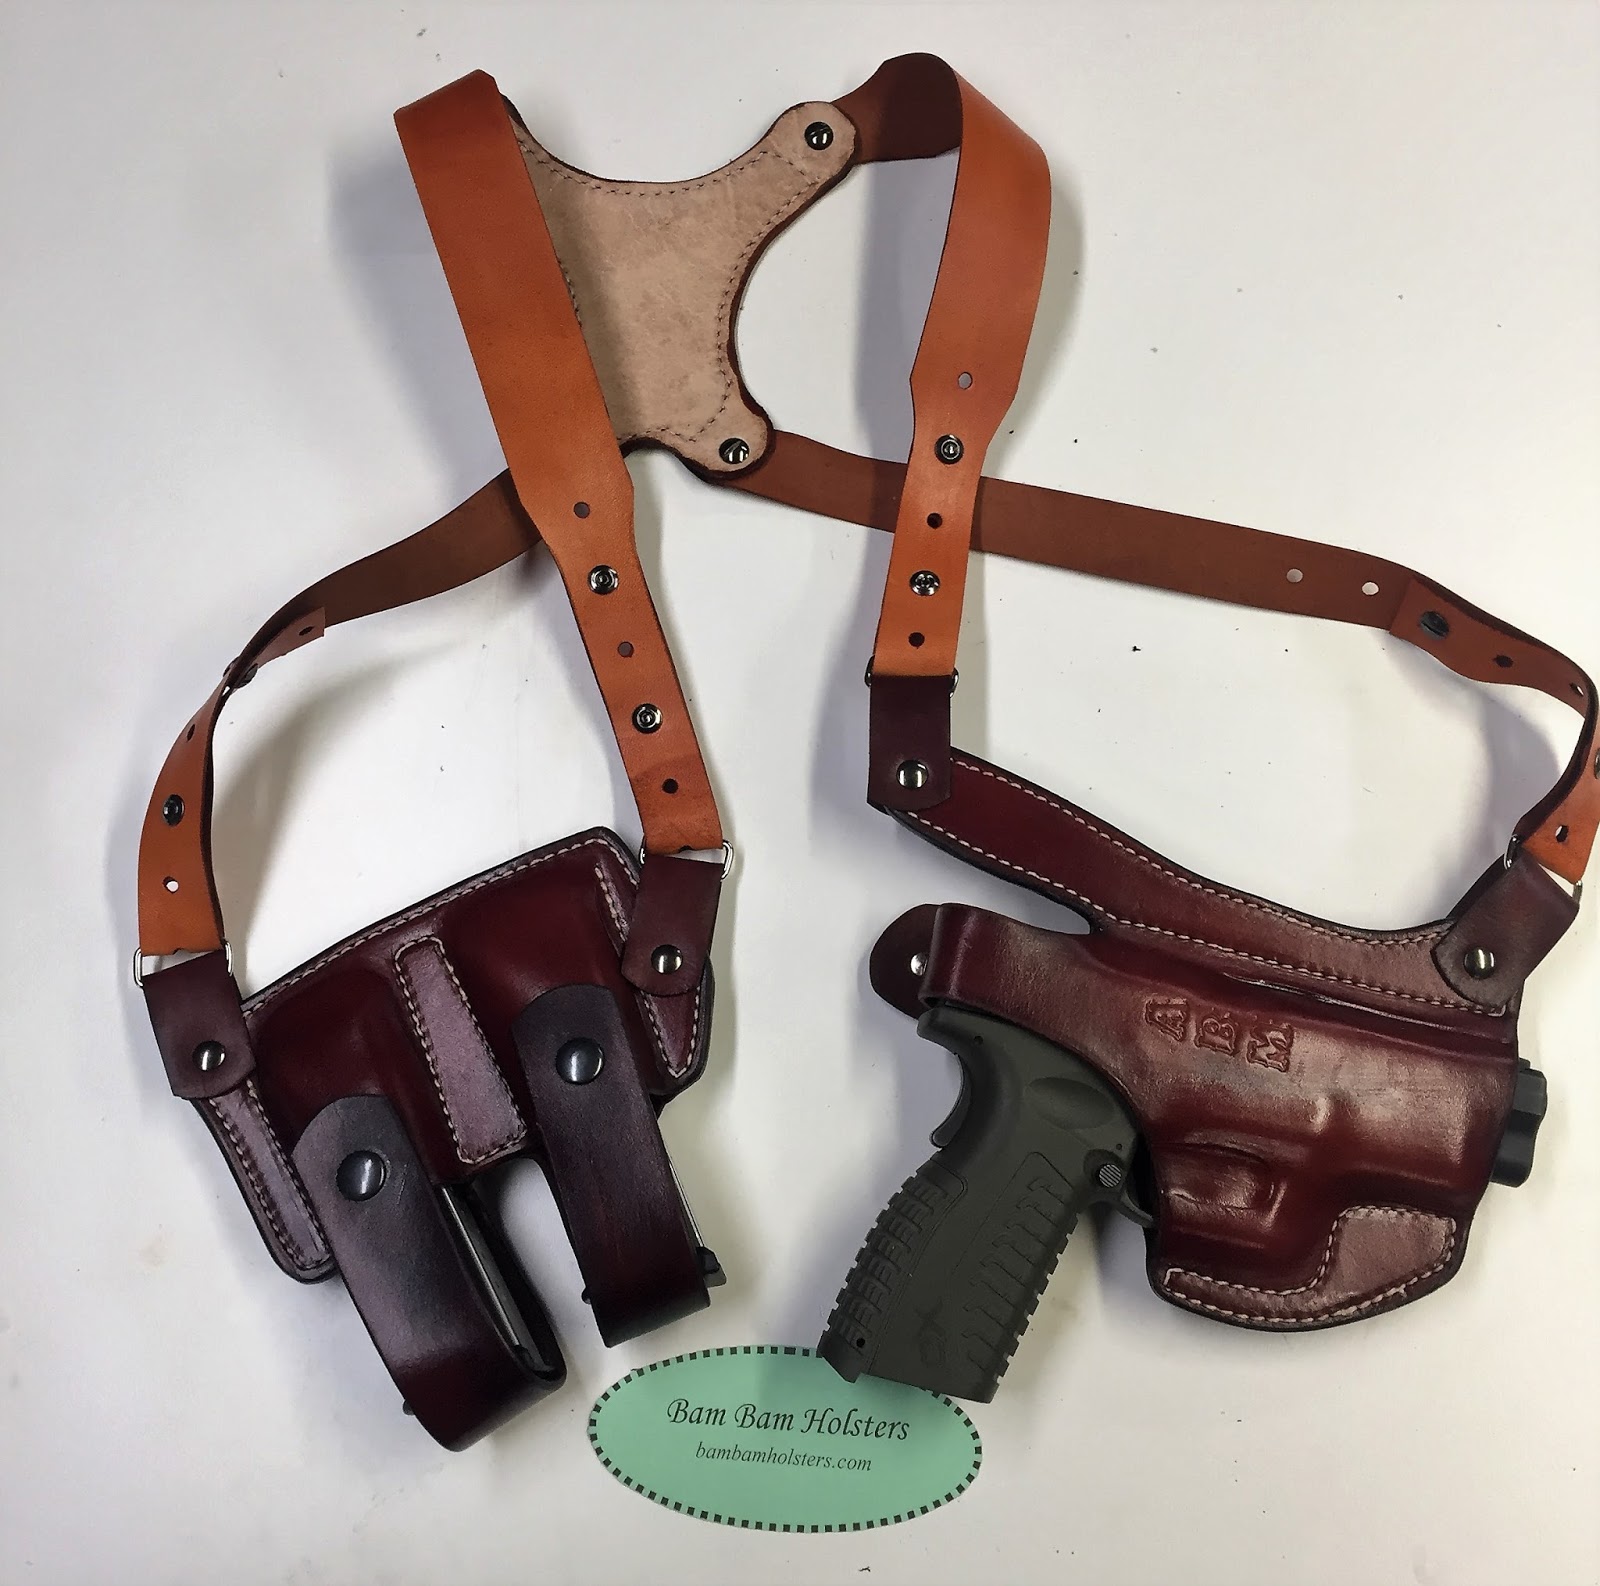 Bam Bam Holsters: What's on the Bench